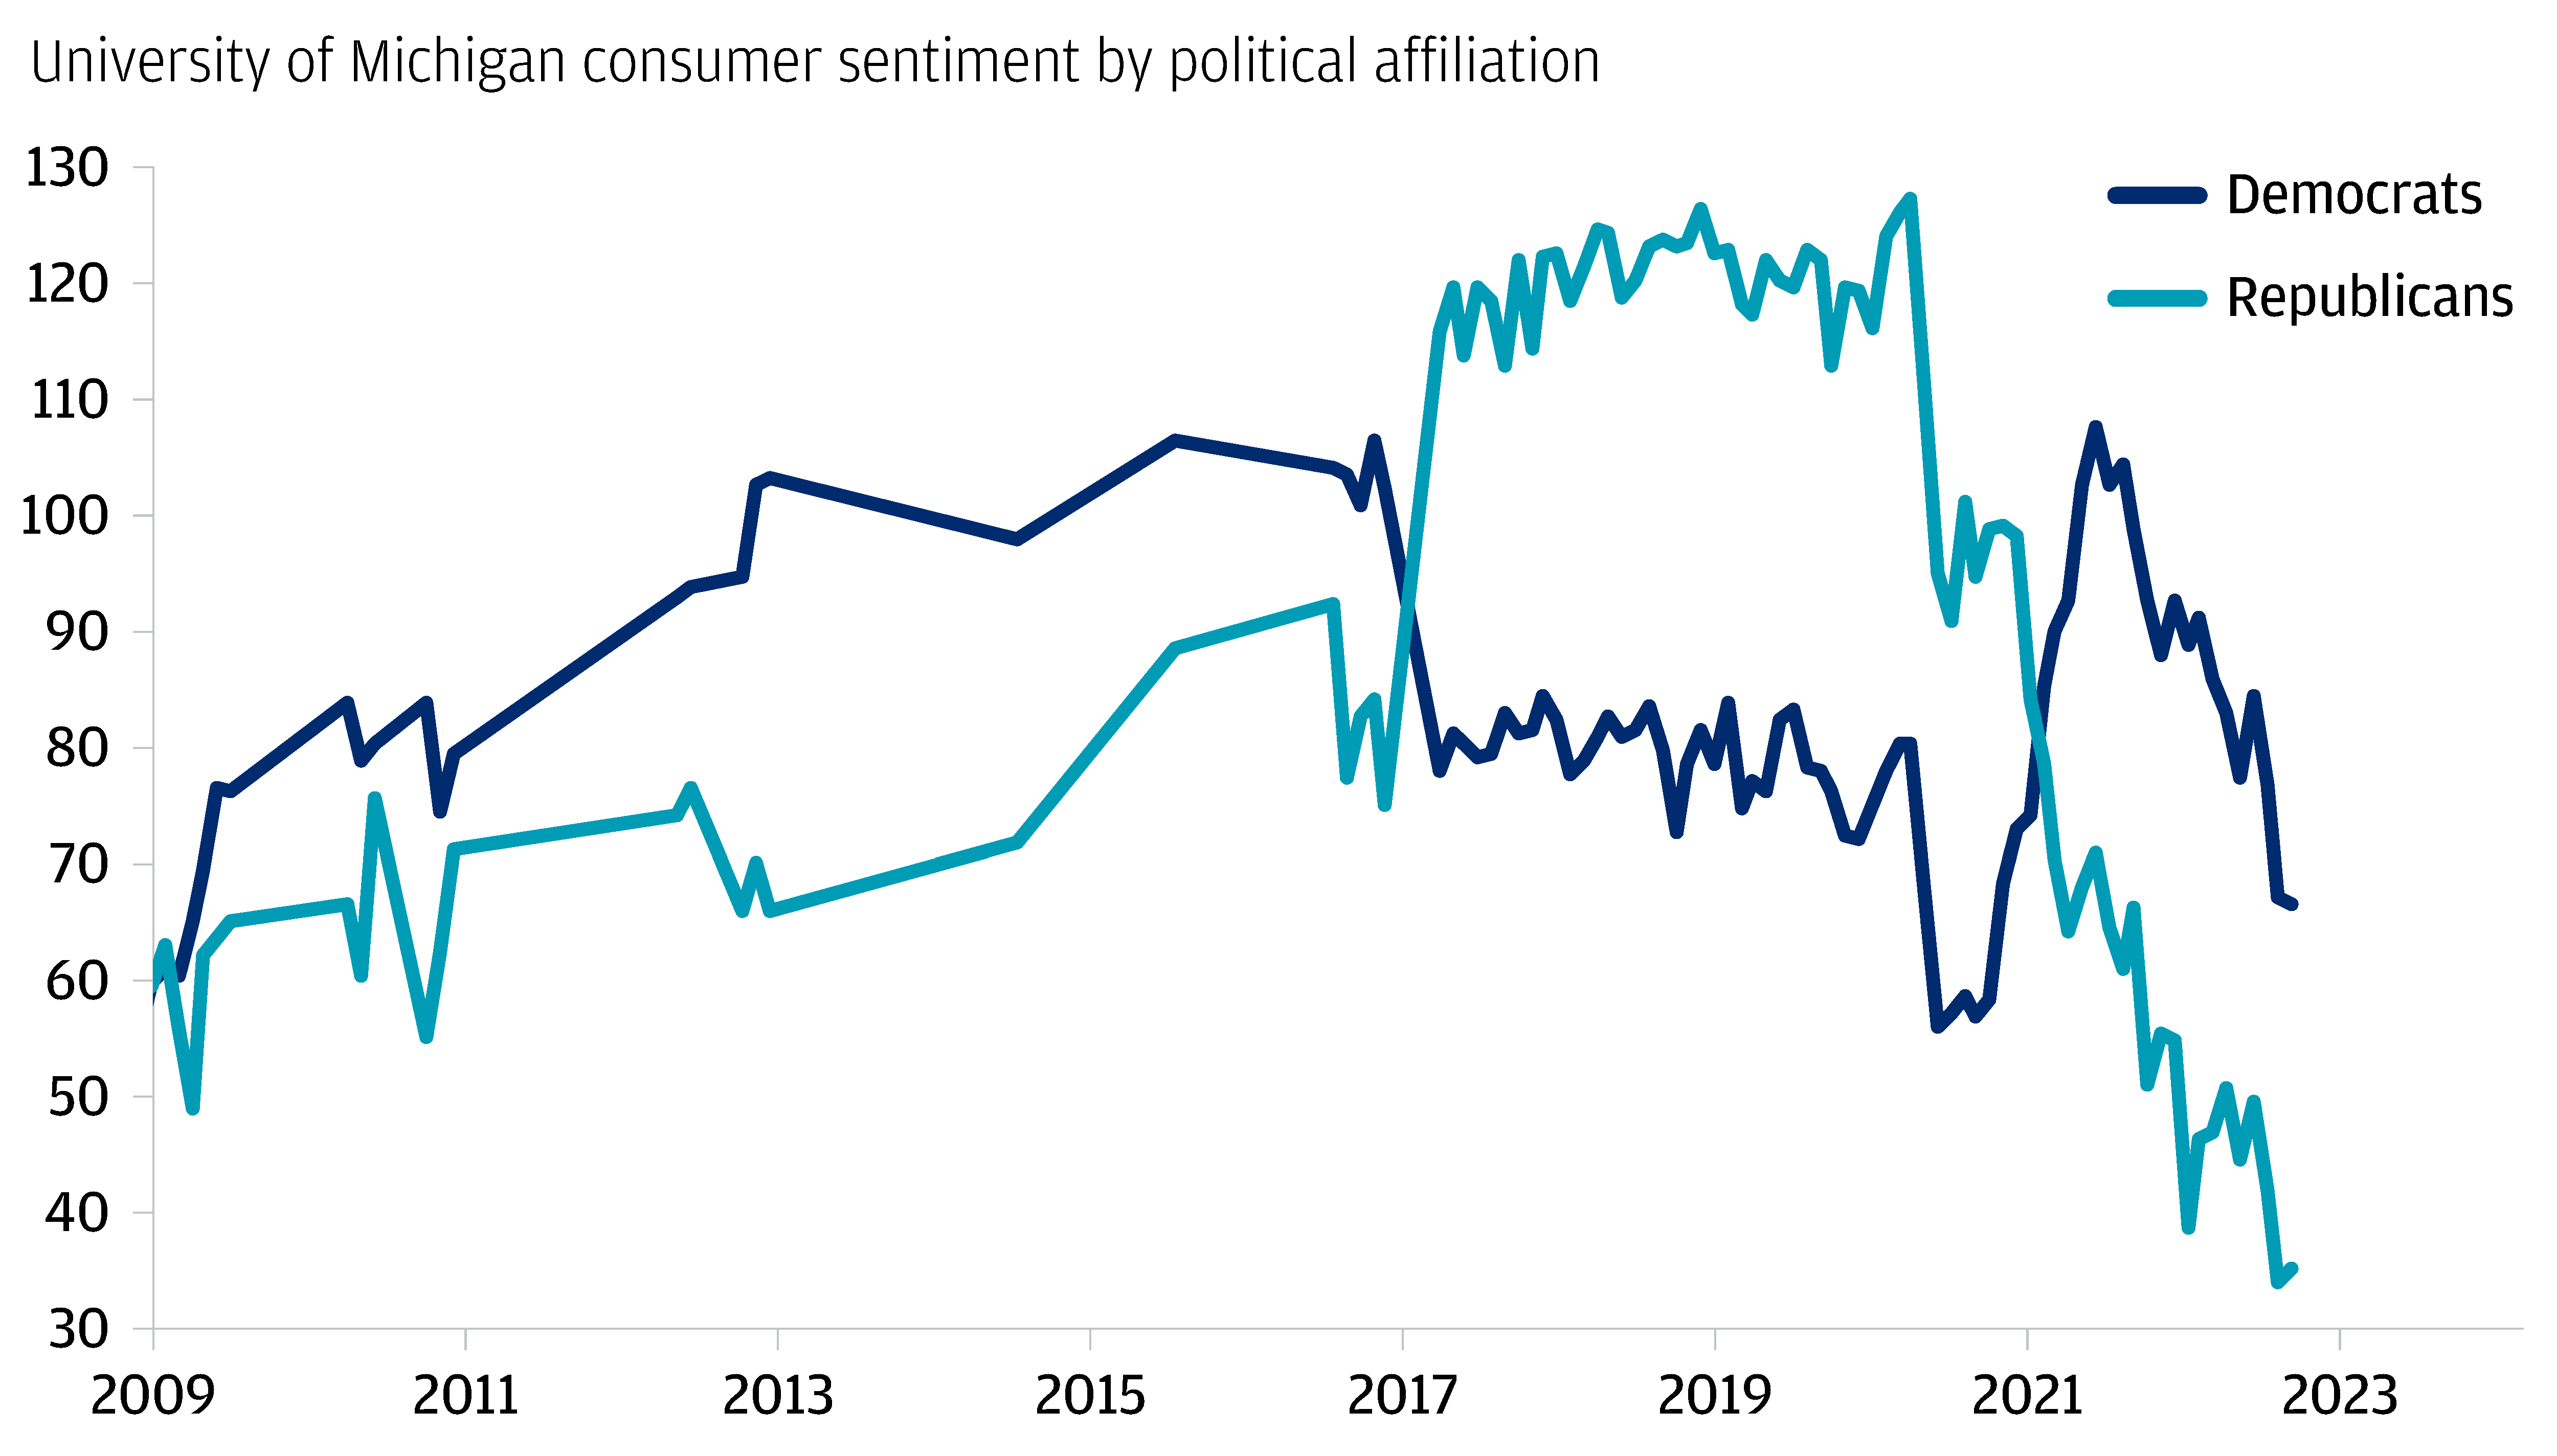 University of Michigan consumer sentiment by political affiliation